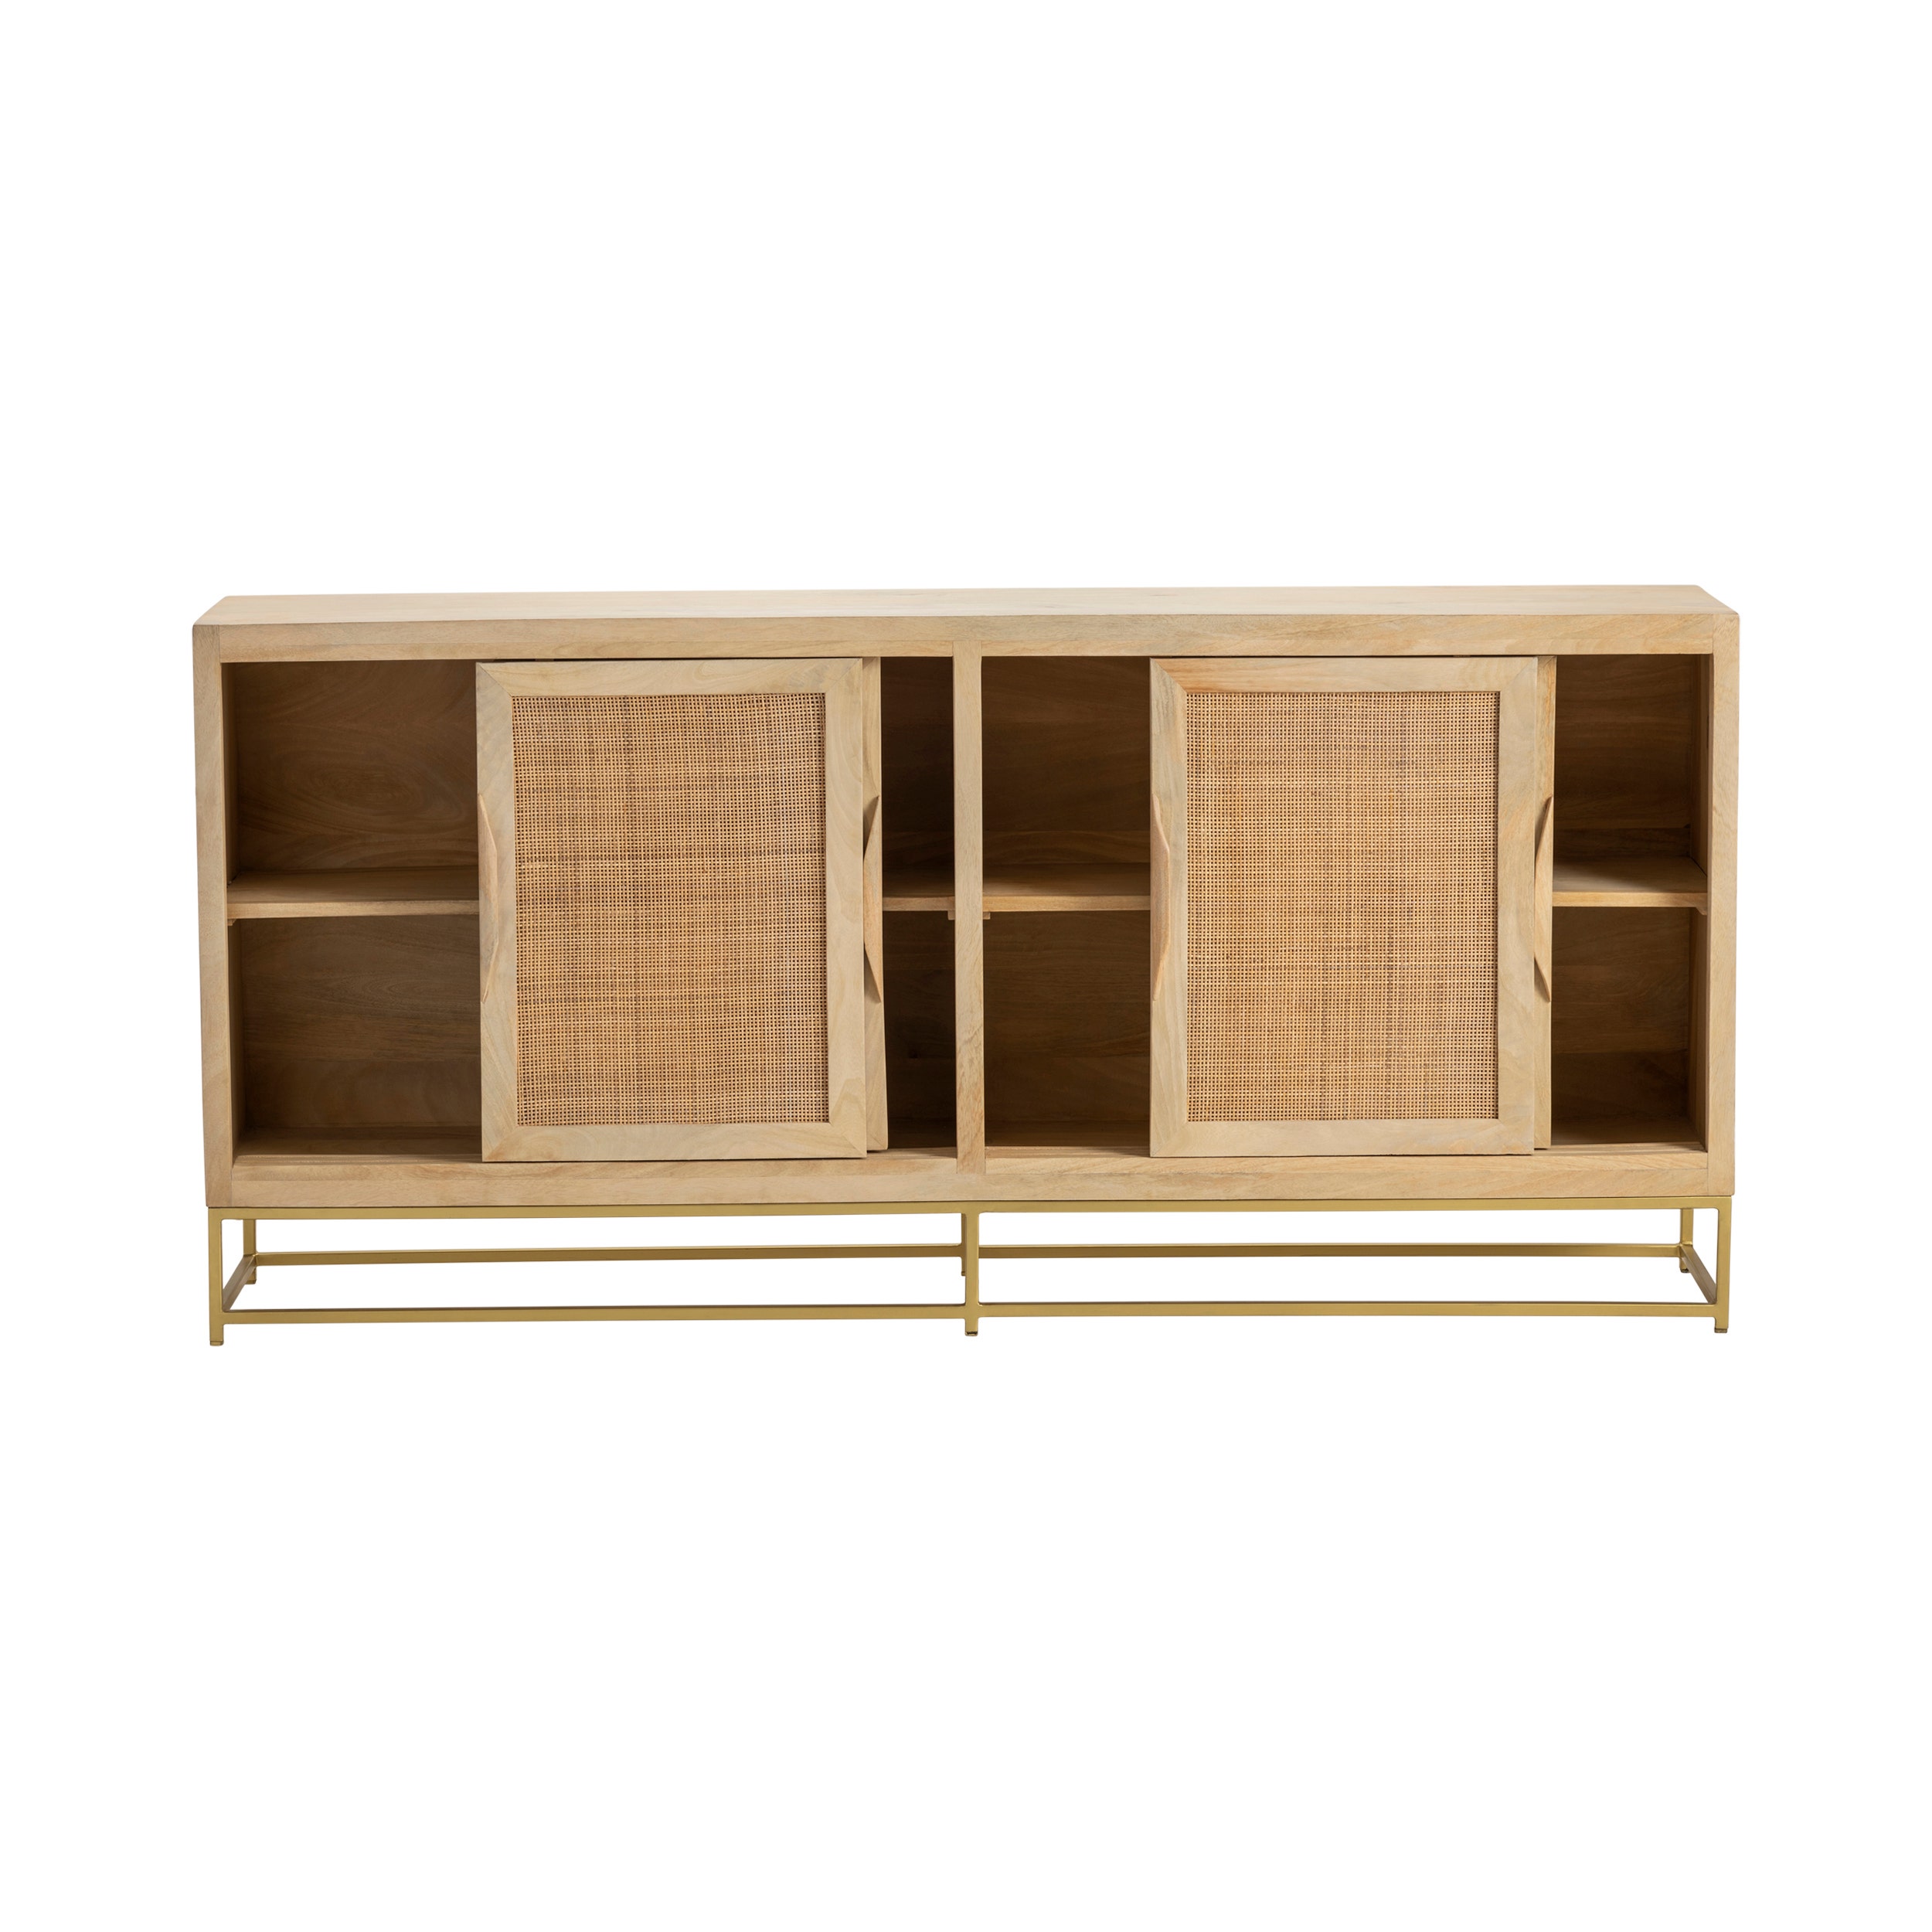 Crestview Biscayne Sideboard - Collection